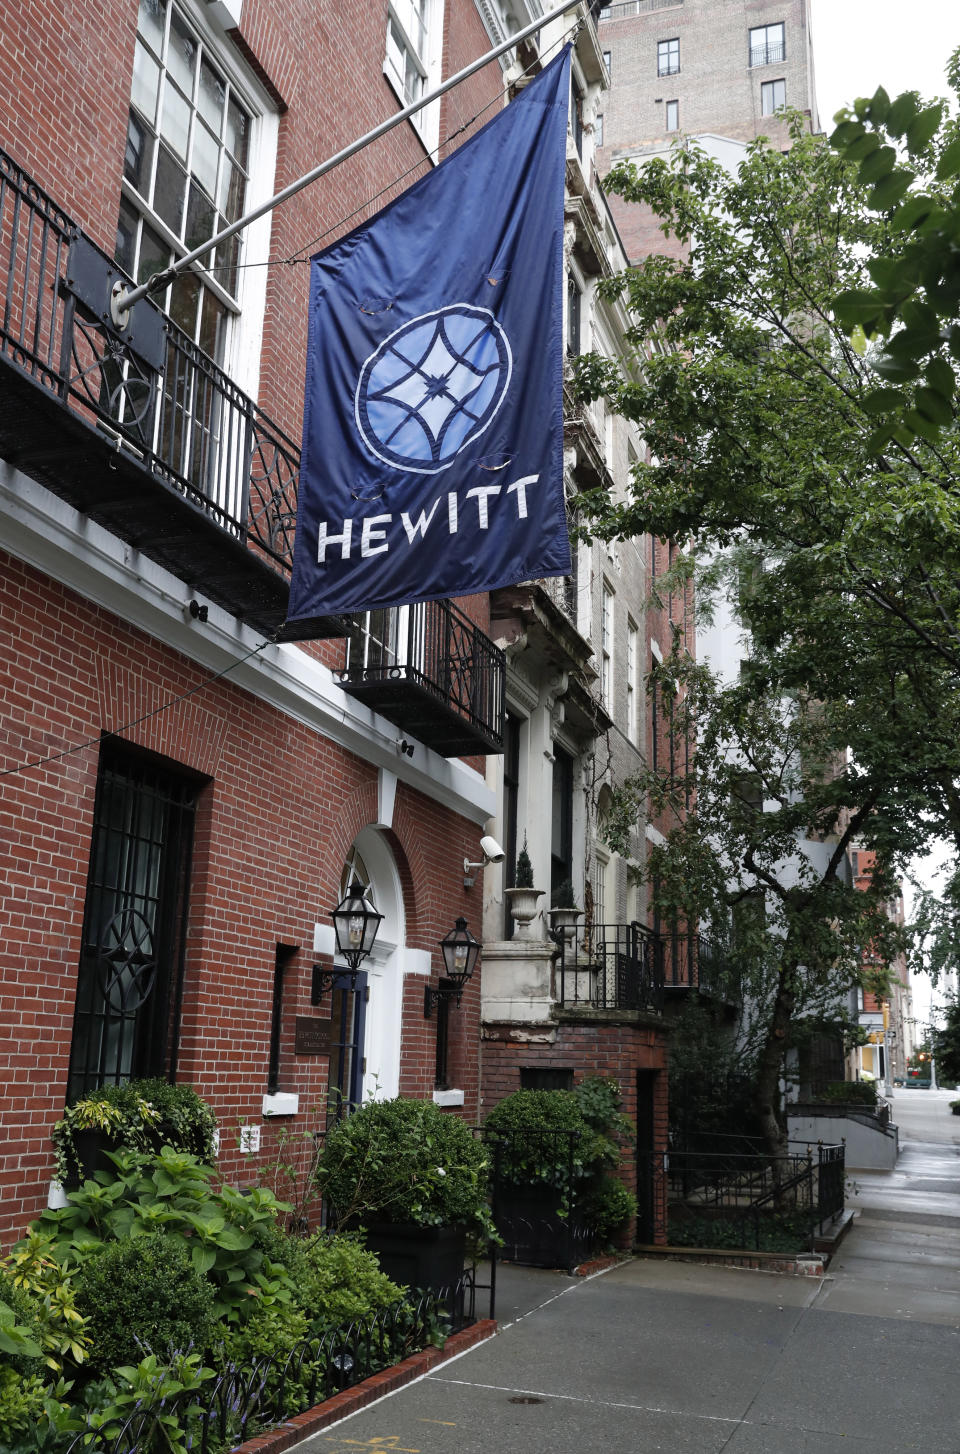 This July 11, 2019, photo, shows the Hewitt School, an all-girls' school located blocks from Financier Jeffrey Epstein's Upper East Side mansion in New York. In the decade since striking a plea deal that required Epstein to register as a child sex offender, he has sought to underwrite all manner of youth causes, such as a baseball program and the school. Some donations, including $15,000 to the school, were returned once recipients learned where they came from. (AP Photo/Kathy Willens)